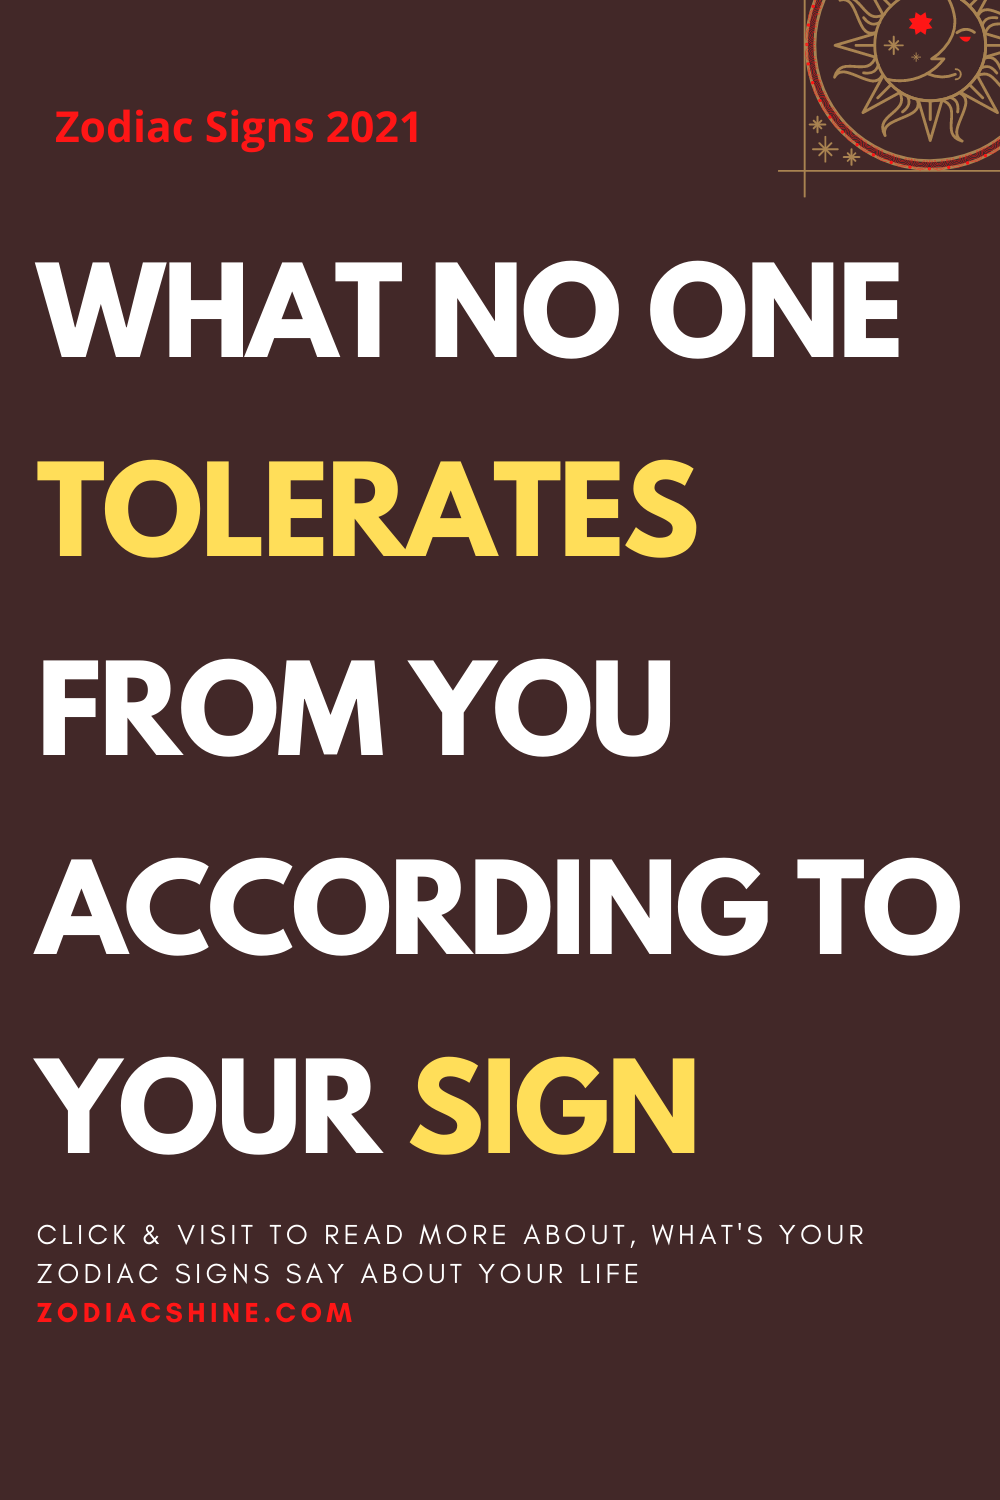 WHAT NO ONE TOLERATES FROM YOU ACCORDING TO YOUR SIGN